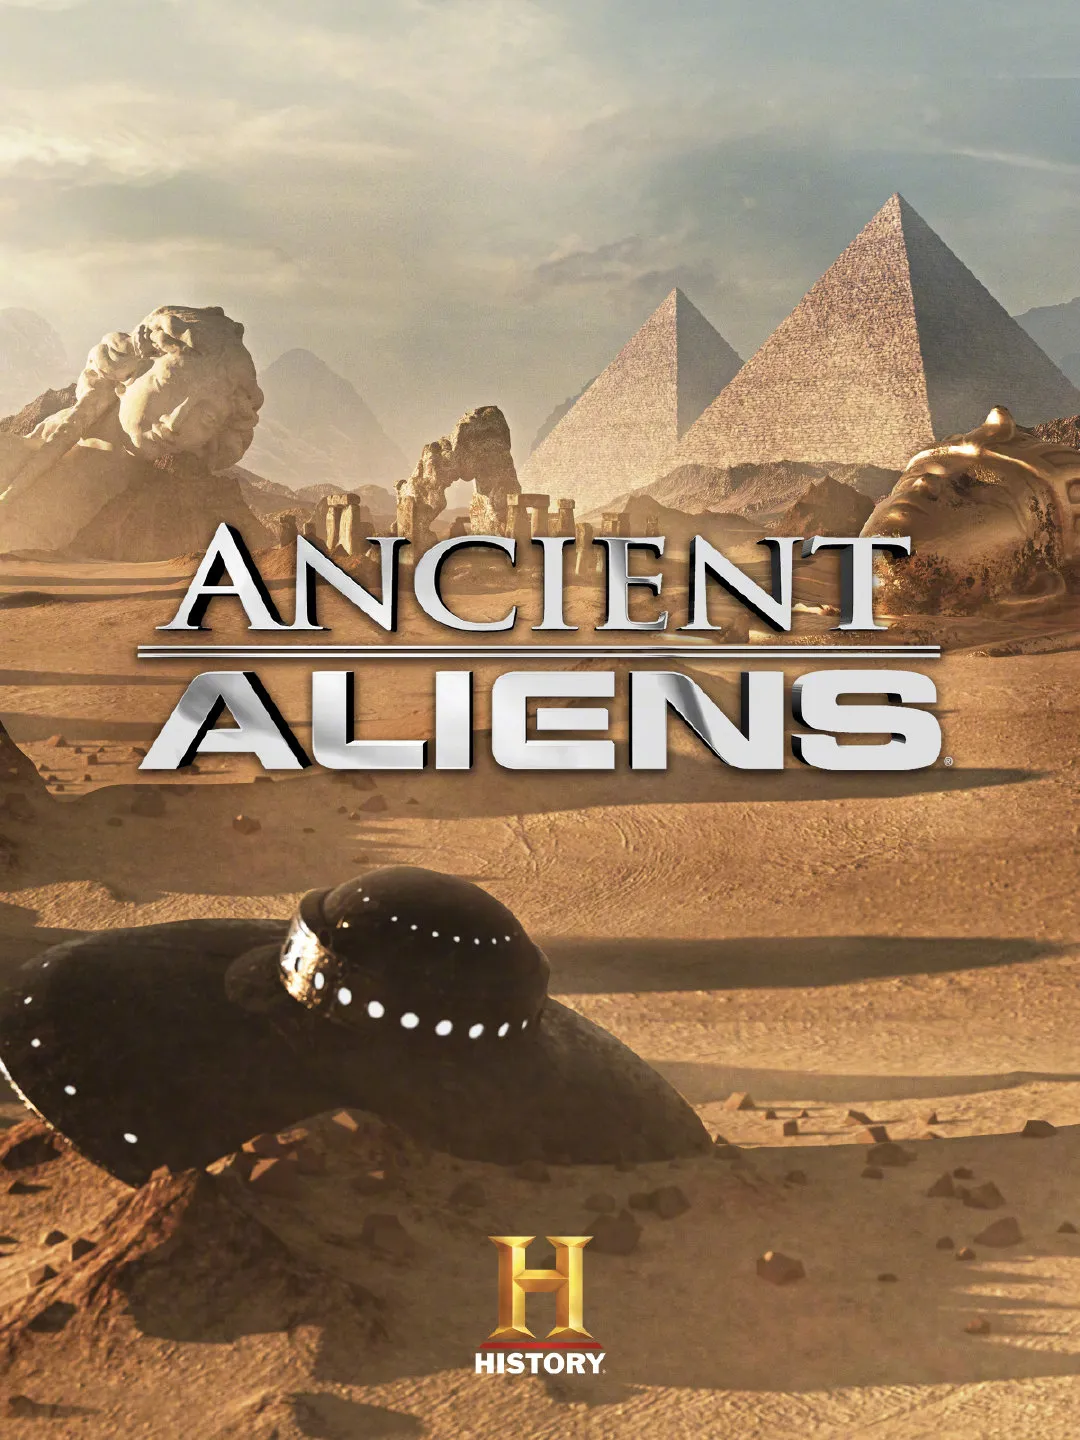 History Channel hit 'Ancient Aliens' will be made into a film, directed by Josh Heald | FMV6